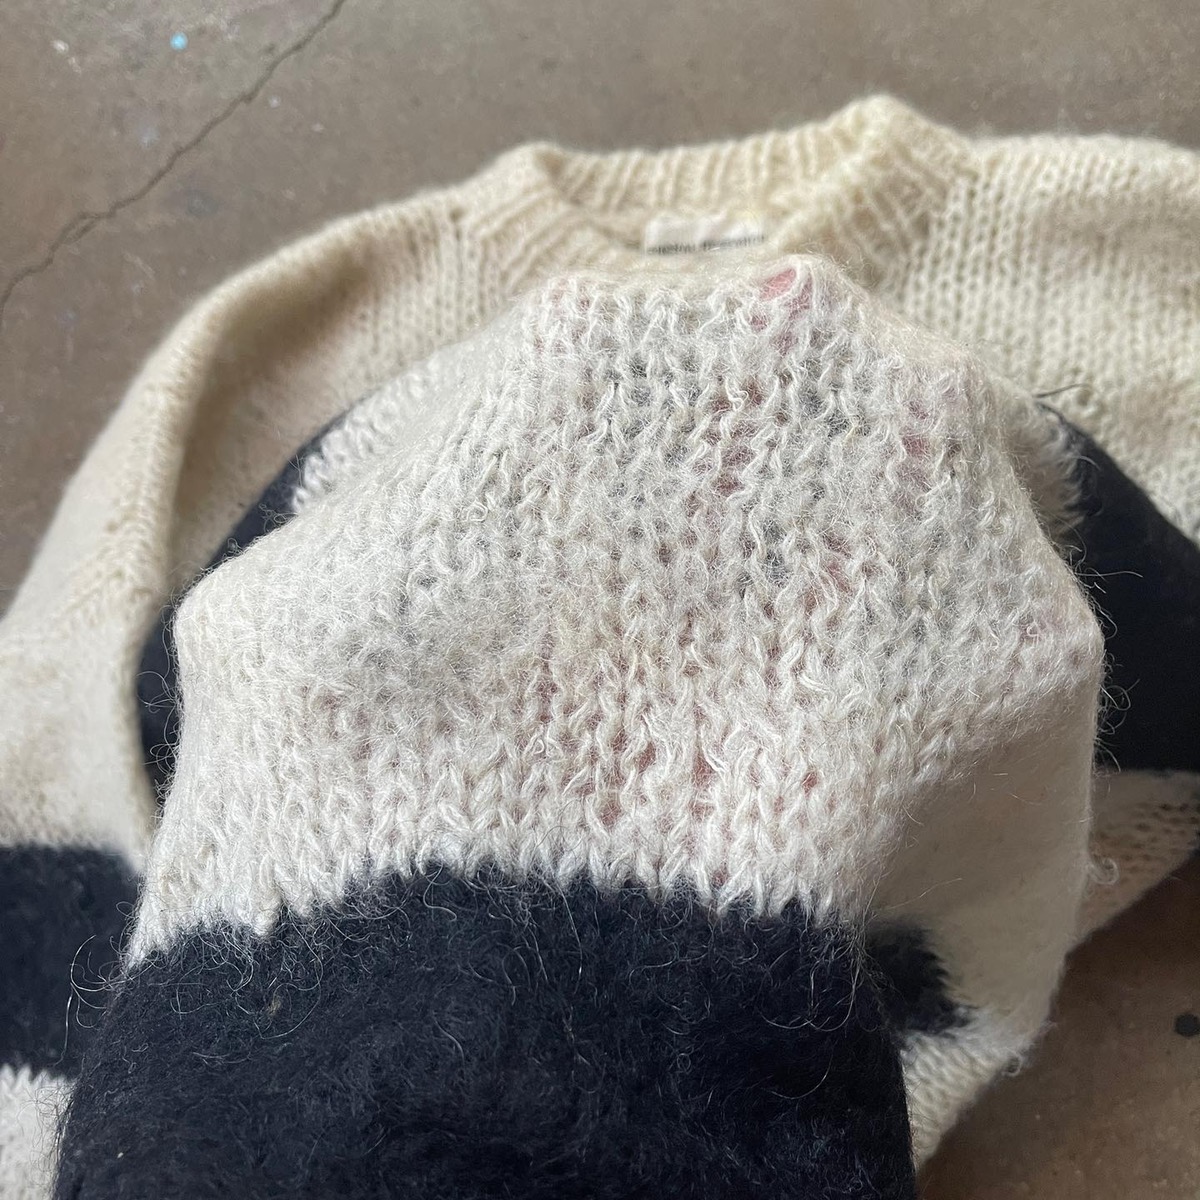 General Research AW1998 Mohair Sweater - 3